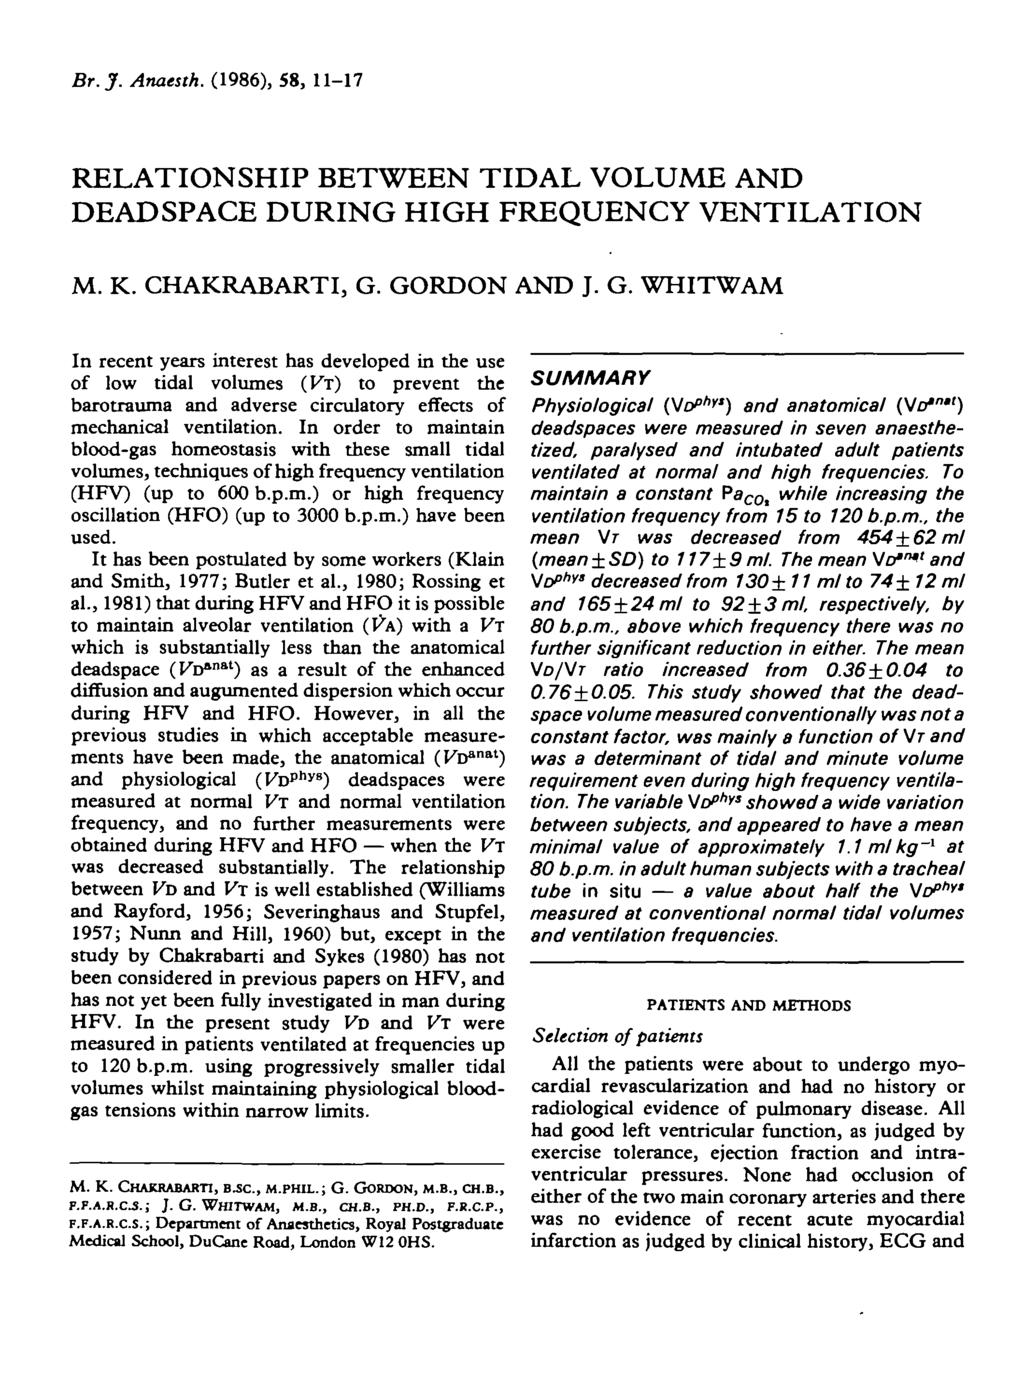 Br.J. Anesth. (1986), 58, 11-17 RELATIONSHIP BETWEEN TIDAL VOLUME AND DEADSPACE DURING HIGH FREQUENCY VENTILATION M. K. CHAKRABARTI, G.